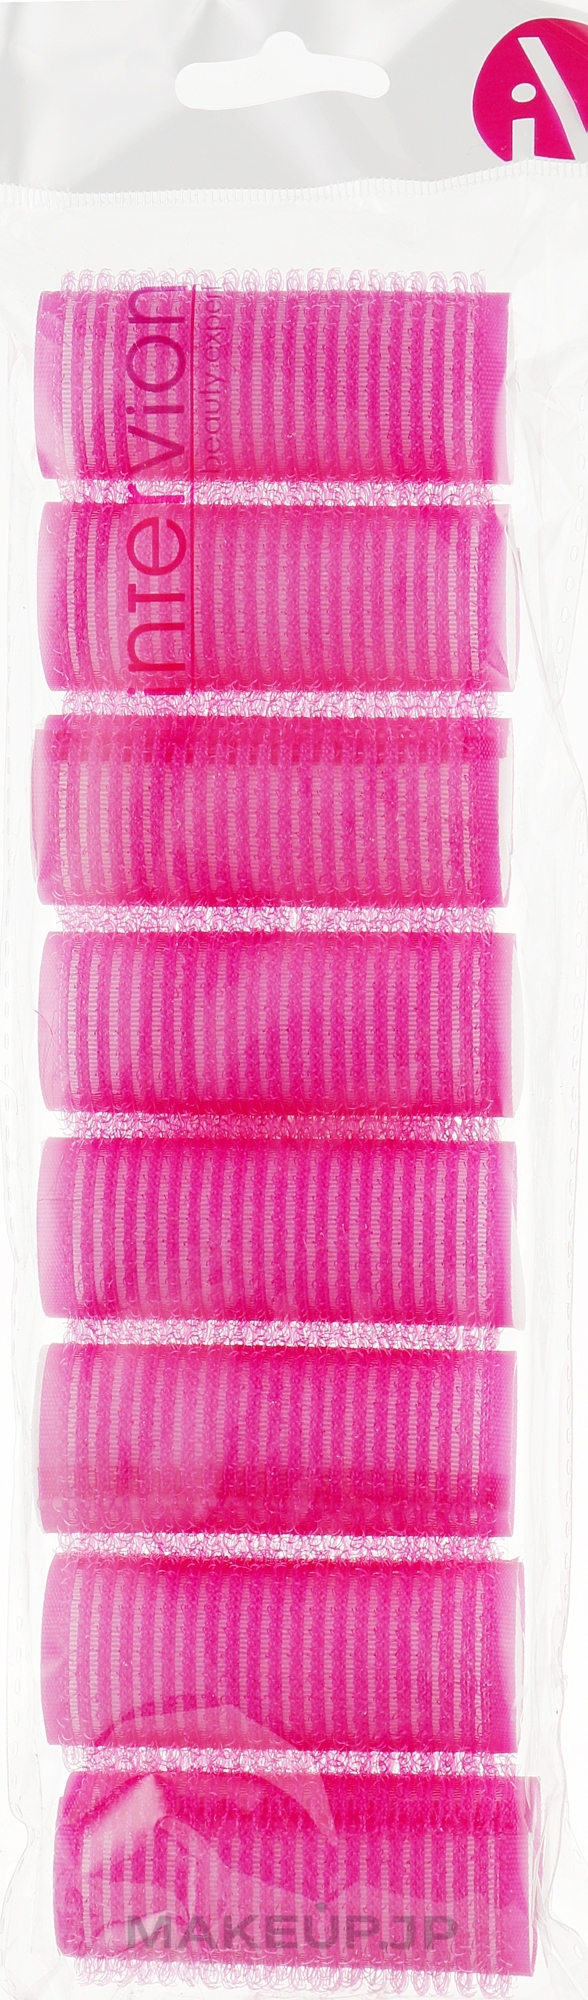 Hair Rollers 498792, Pink, 25 mm - Inter-Vion — photo 8 szt.